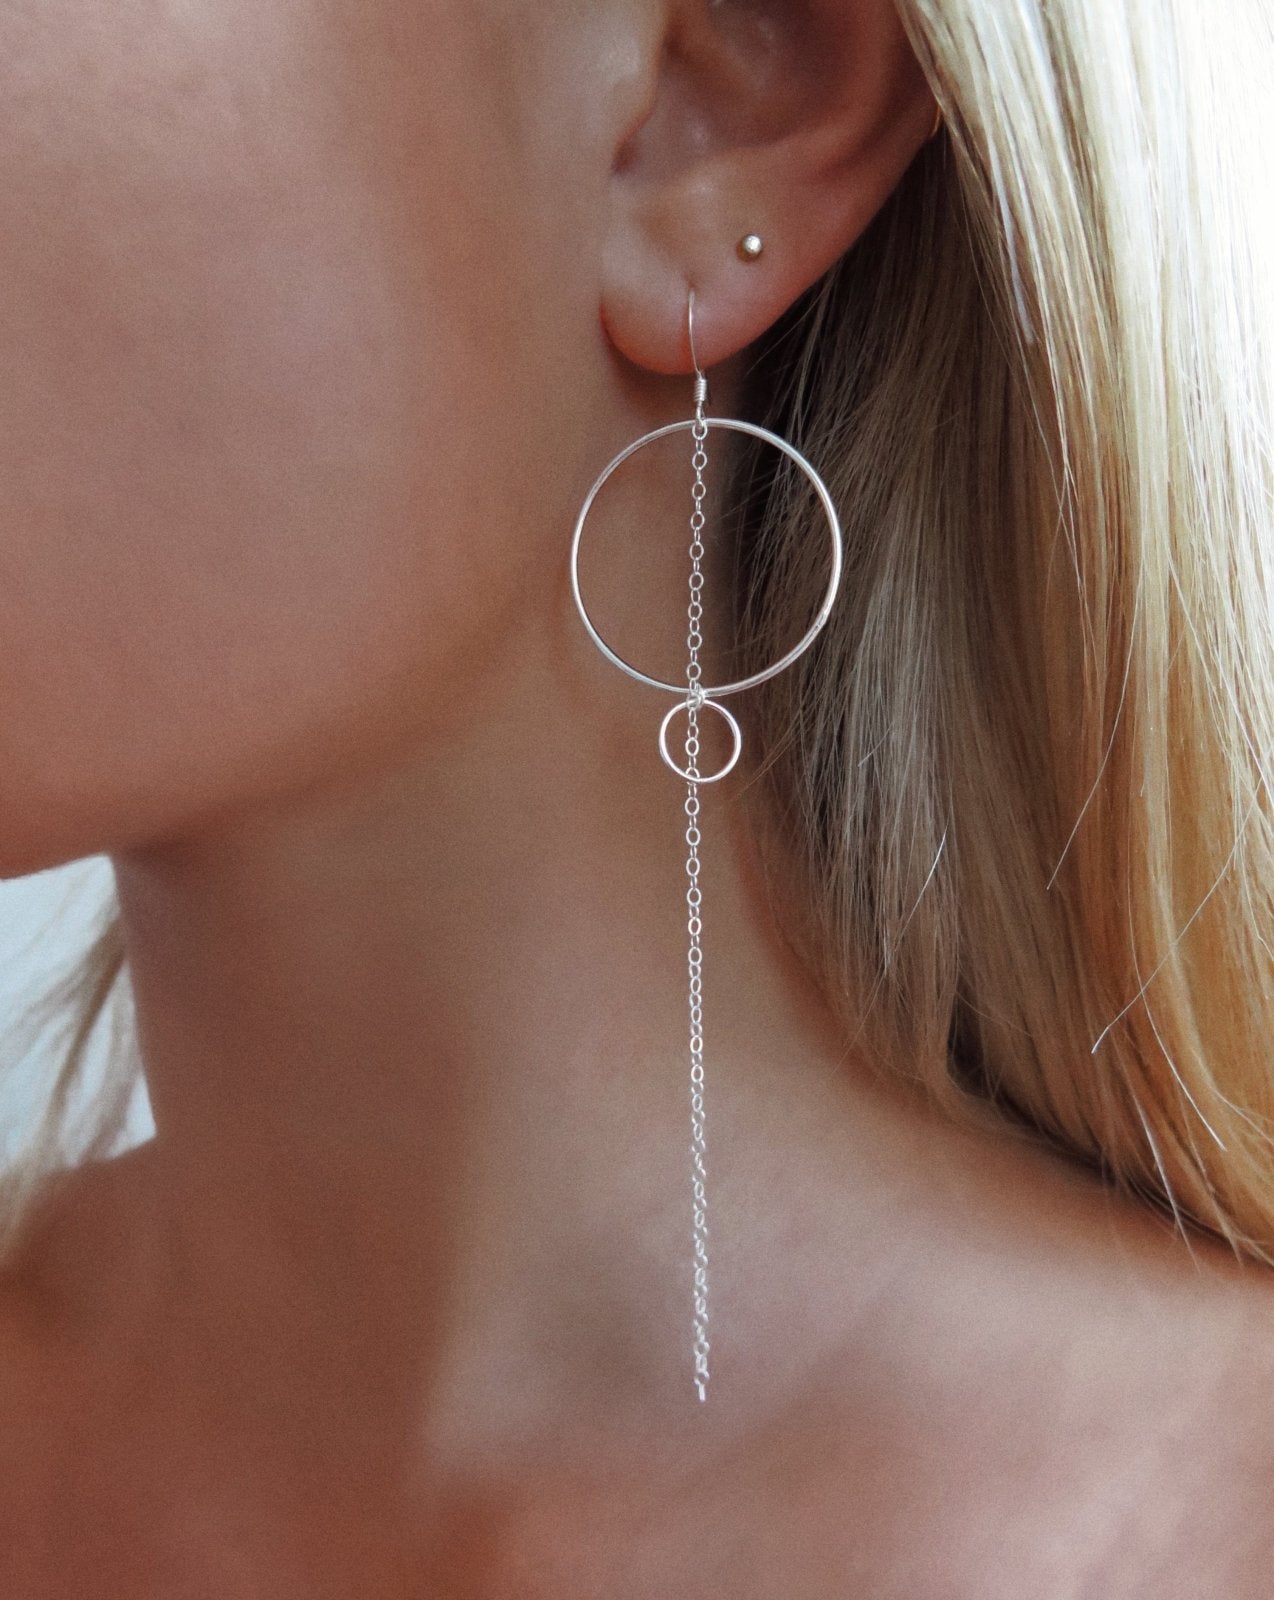 DOUBLE RING CHAIN EARRINGS- Sterling Silver - The Littl - 5cm -